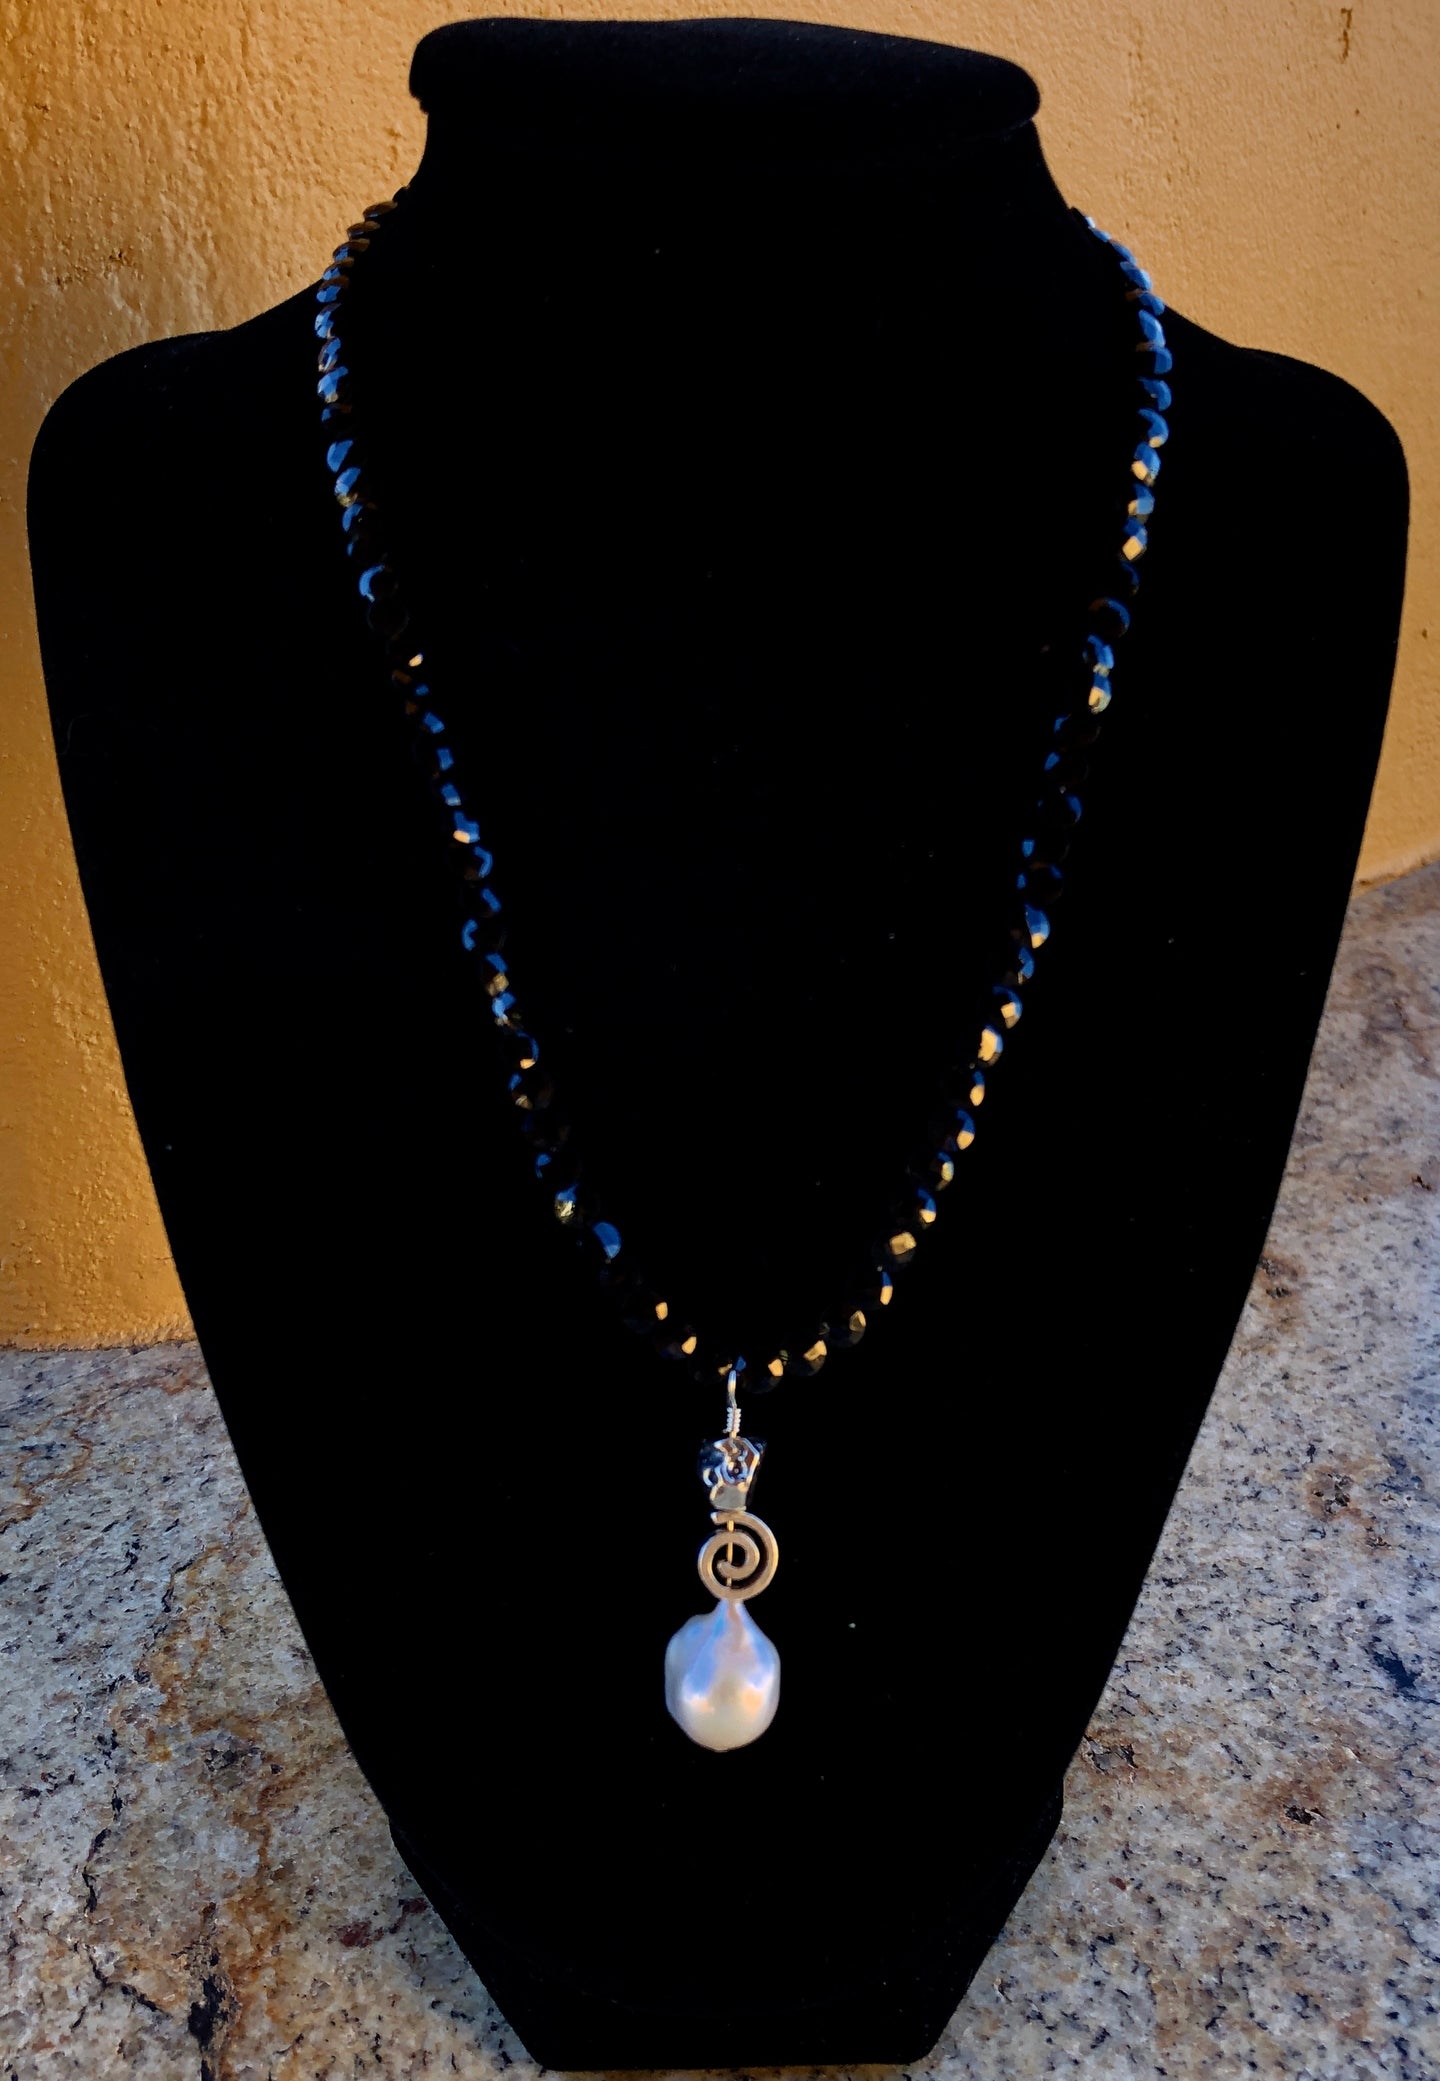 Necklace black spinel with baroque pearl pendant